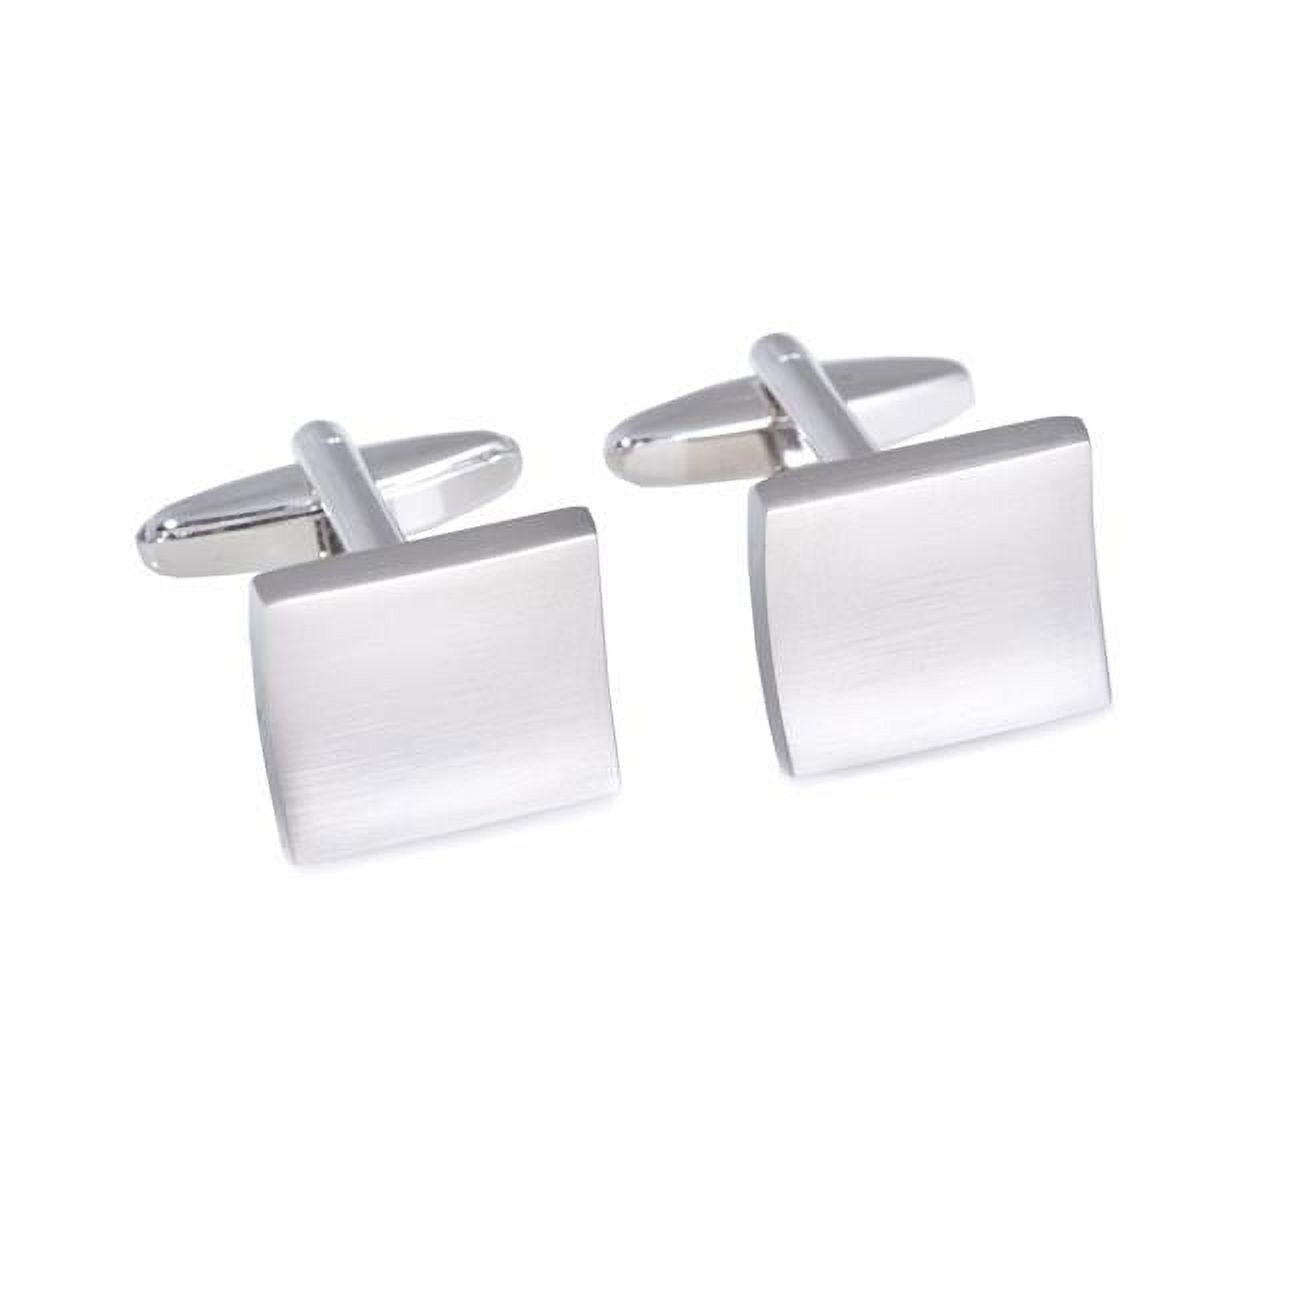 Picture of Bey-Berk International J145 Rhodium Plated Square Concave Cufflinks in Satin Finish - Silver